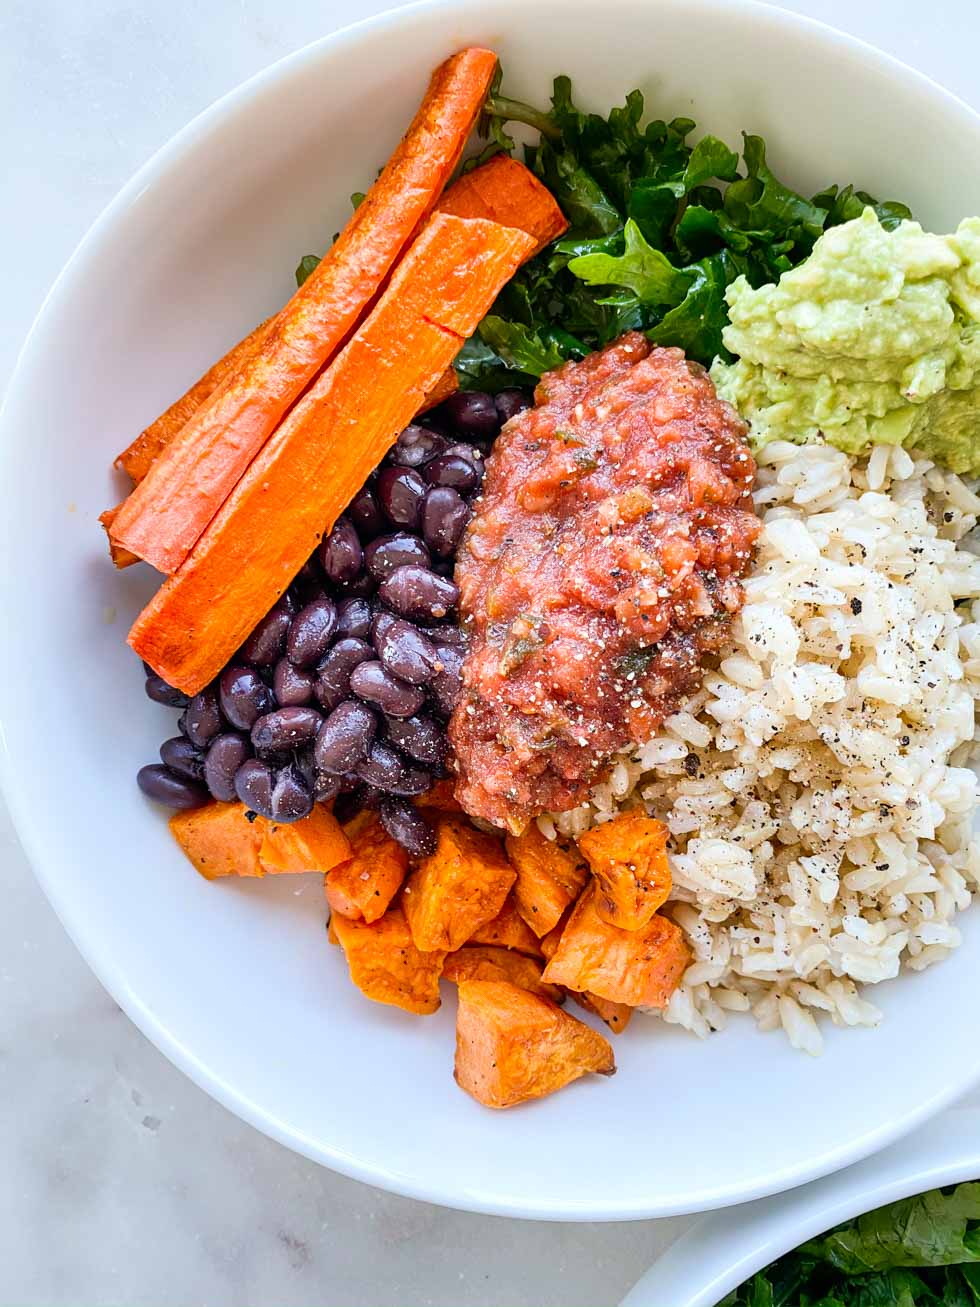 Plant Based Mexican Bowls